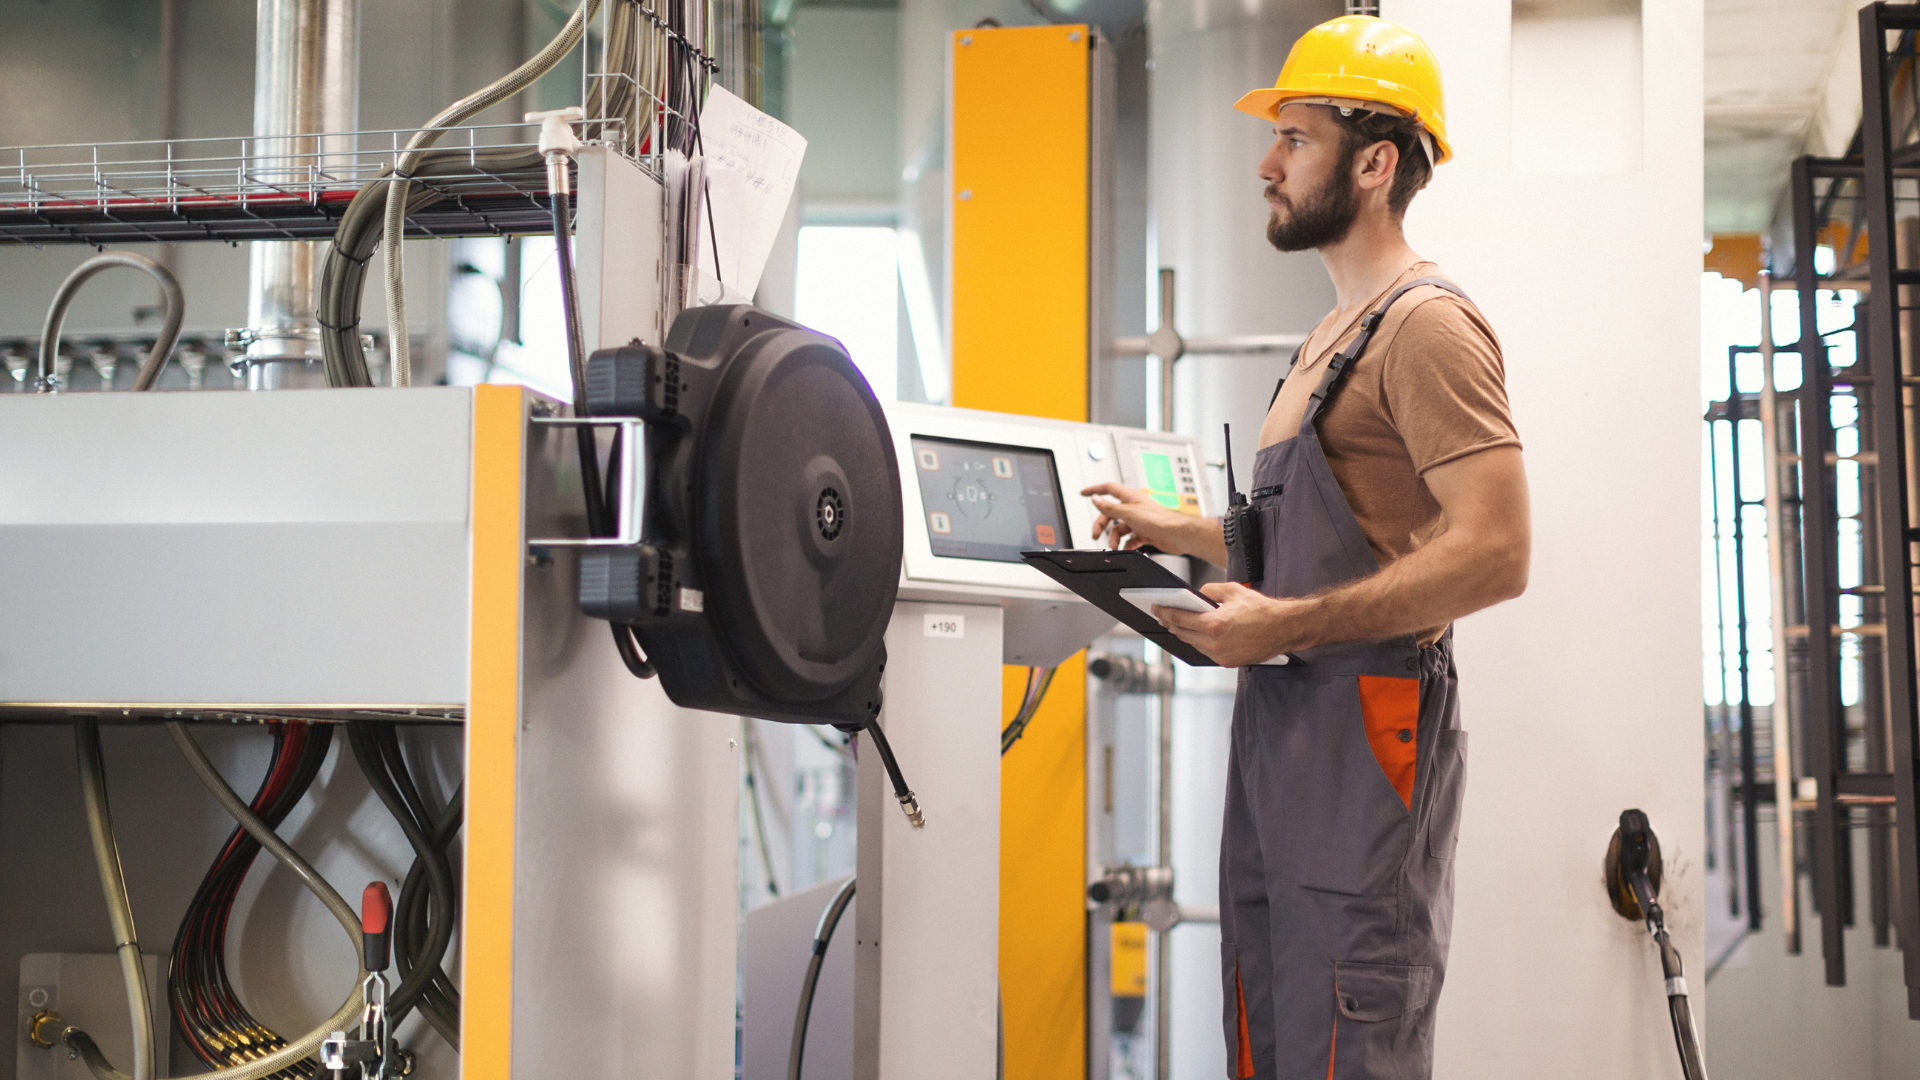 Machine Safety Today: Protect Your Most Valuable Asset